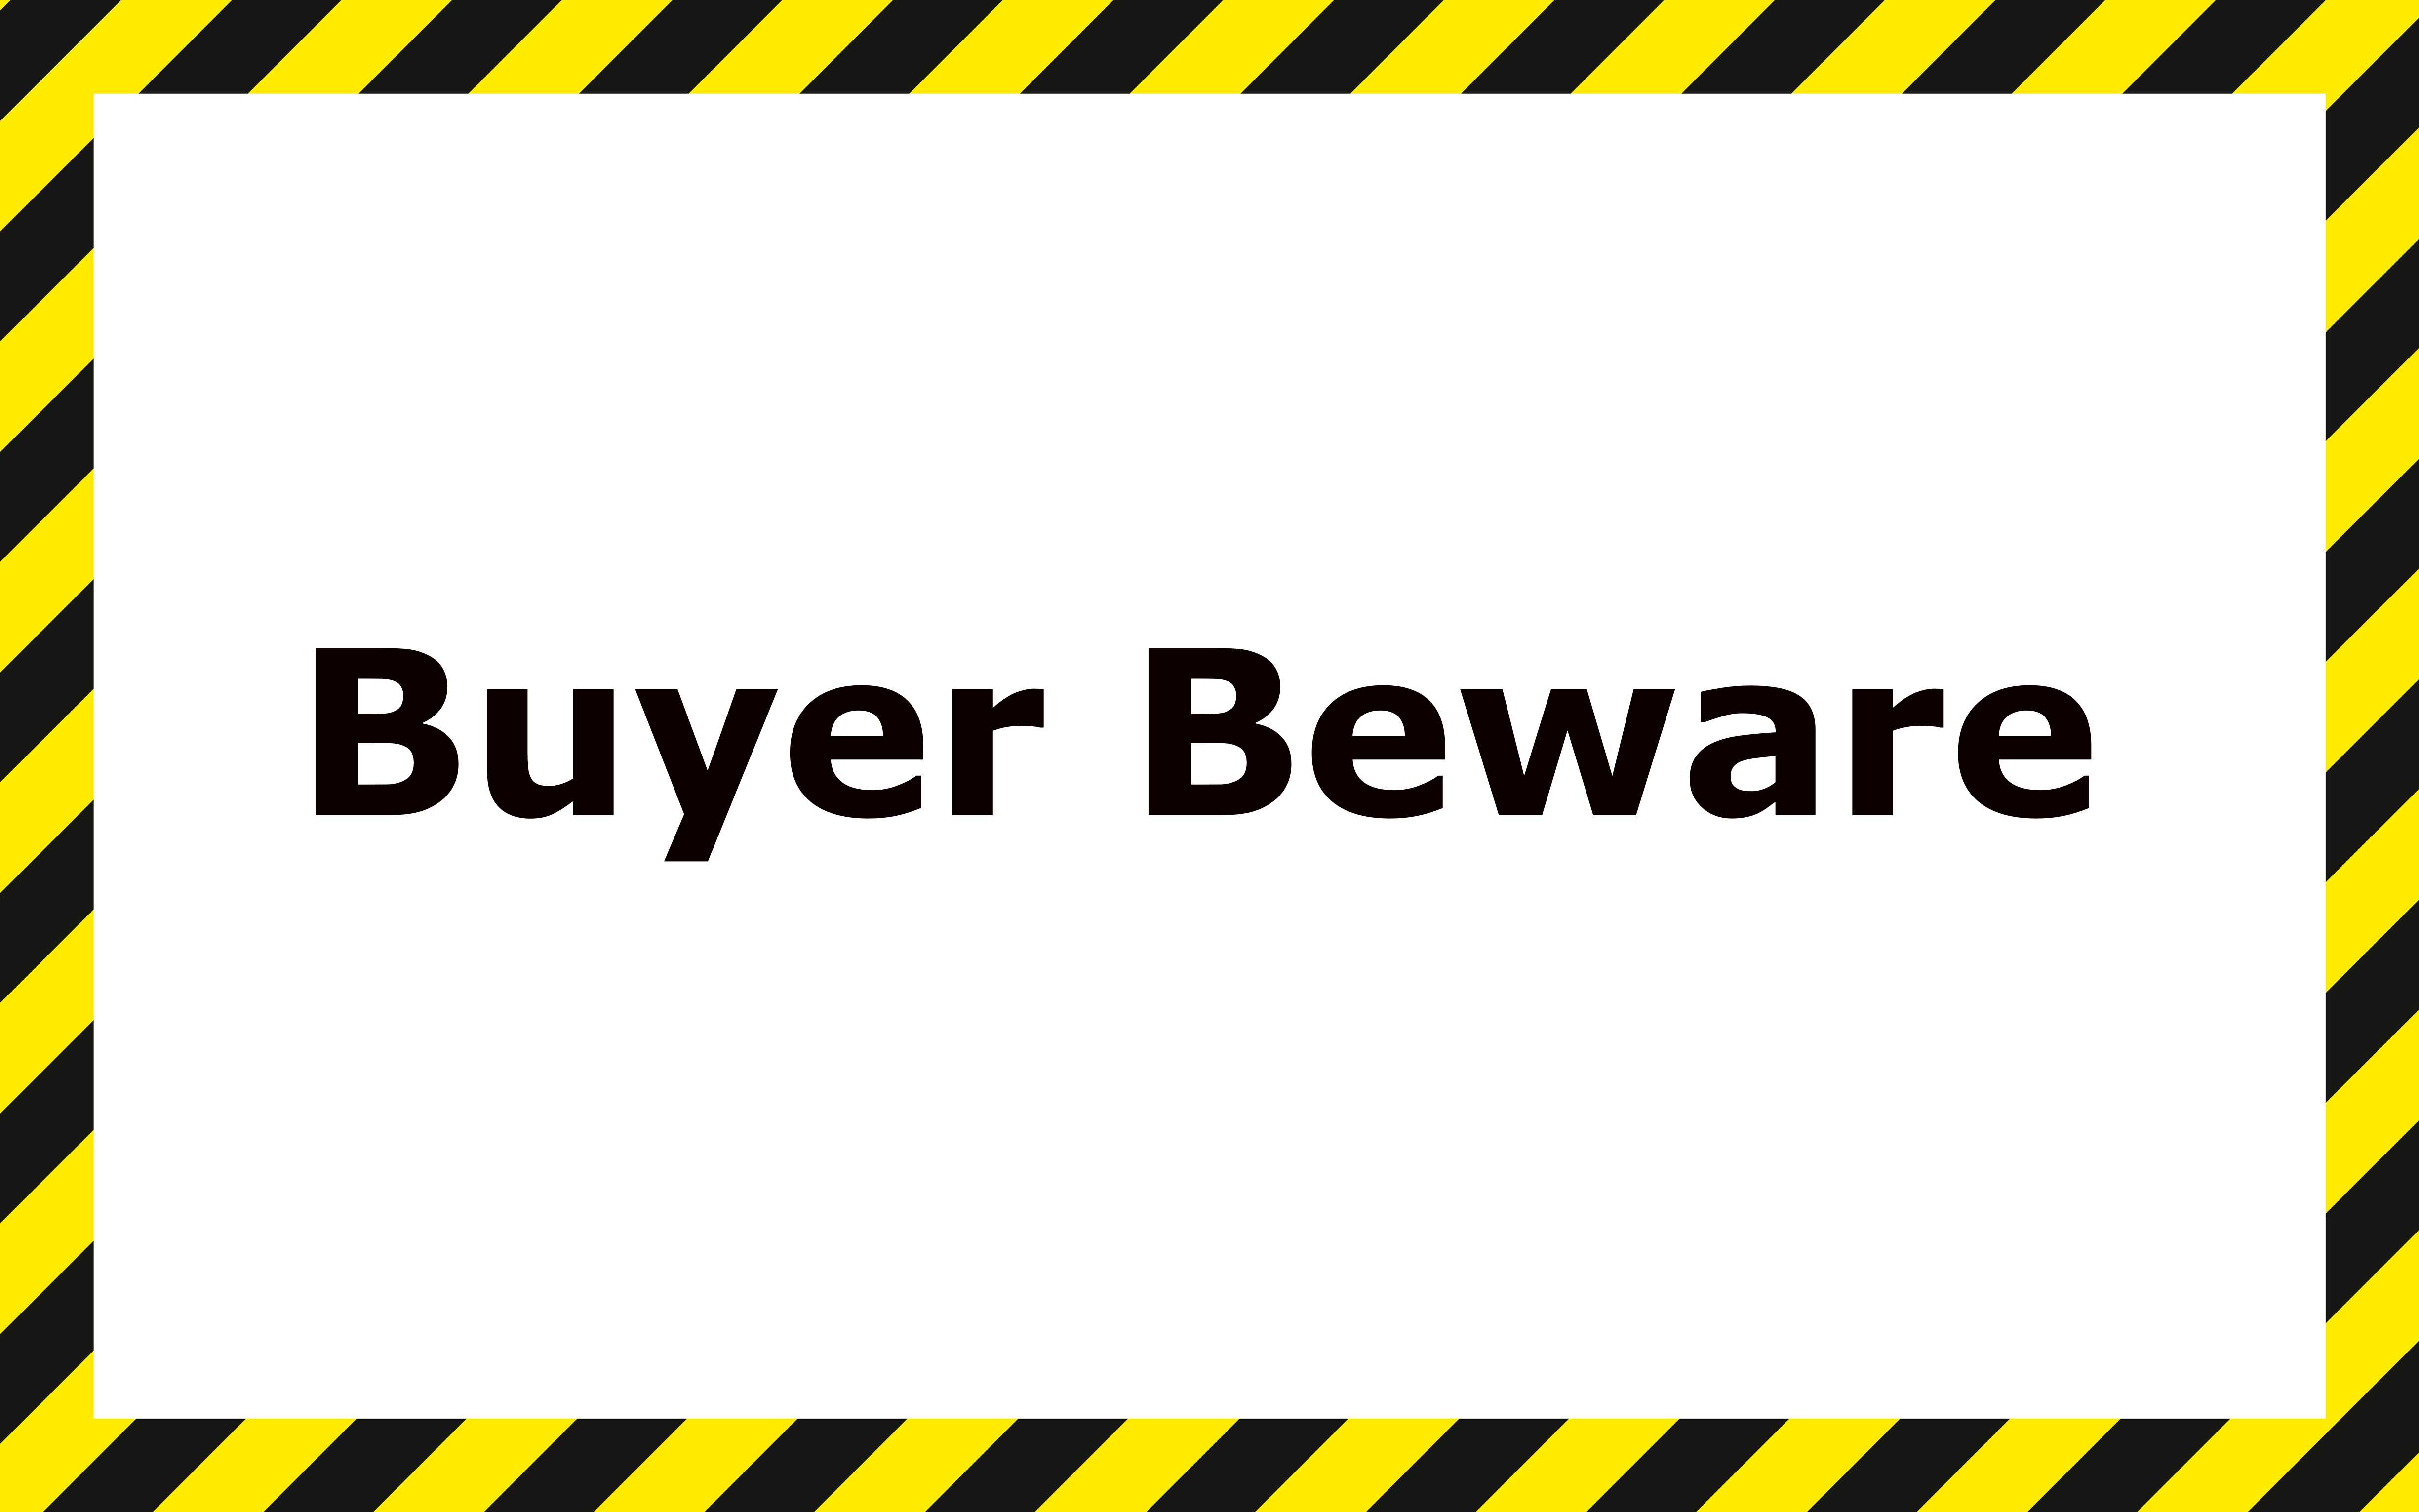 Buyer Beware: Avoid a Costly Security Mistake